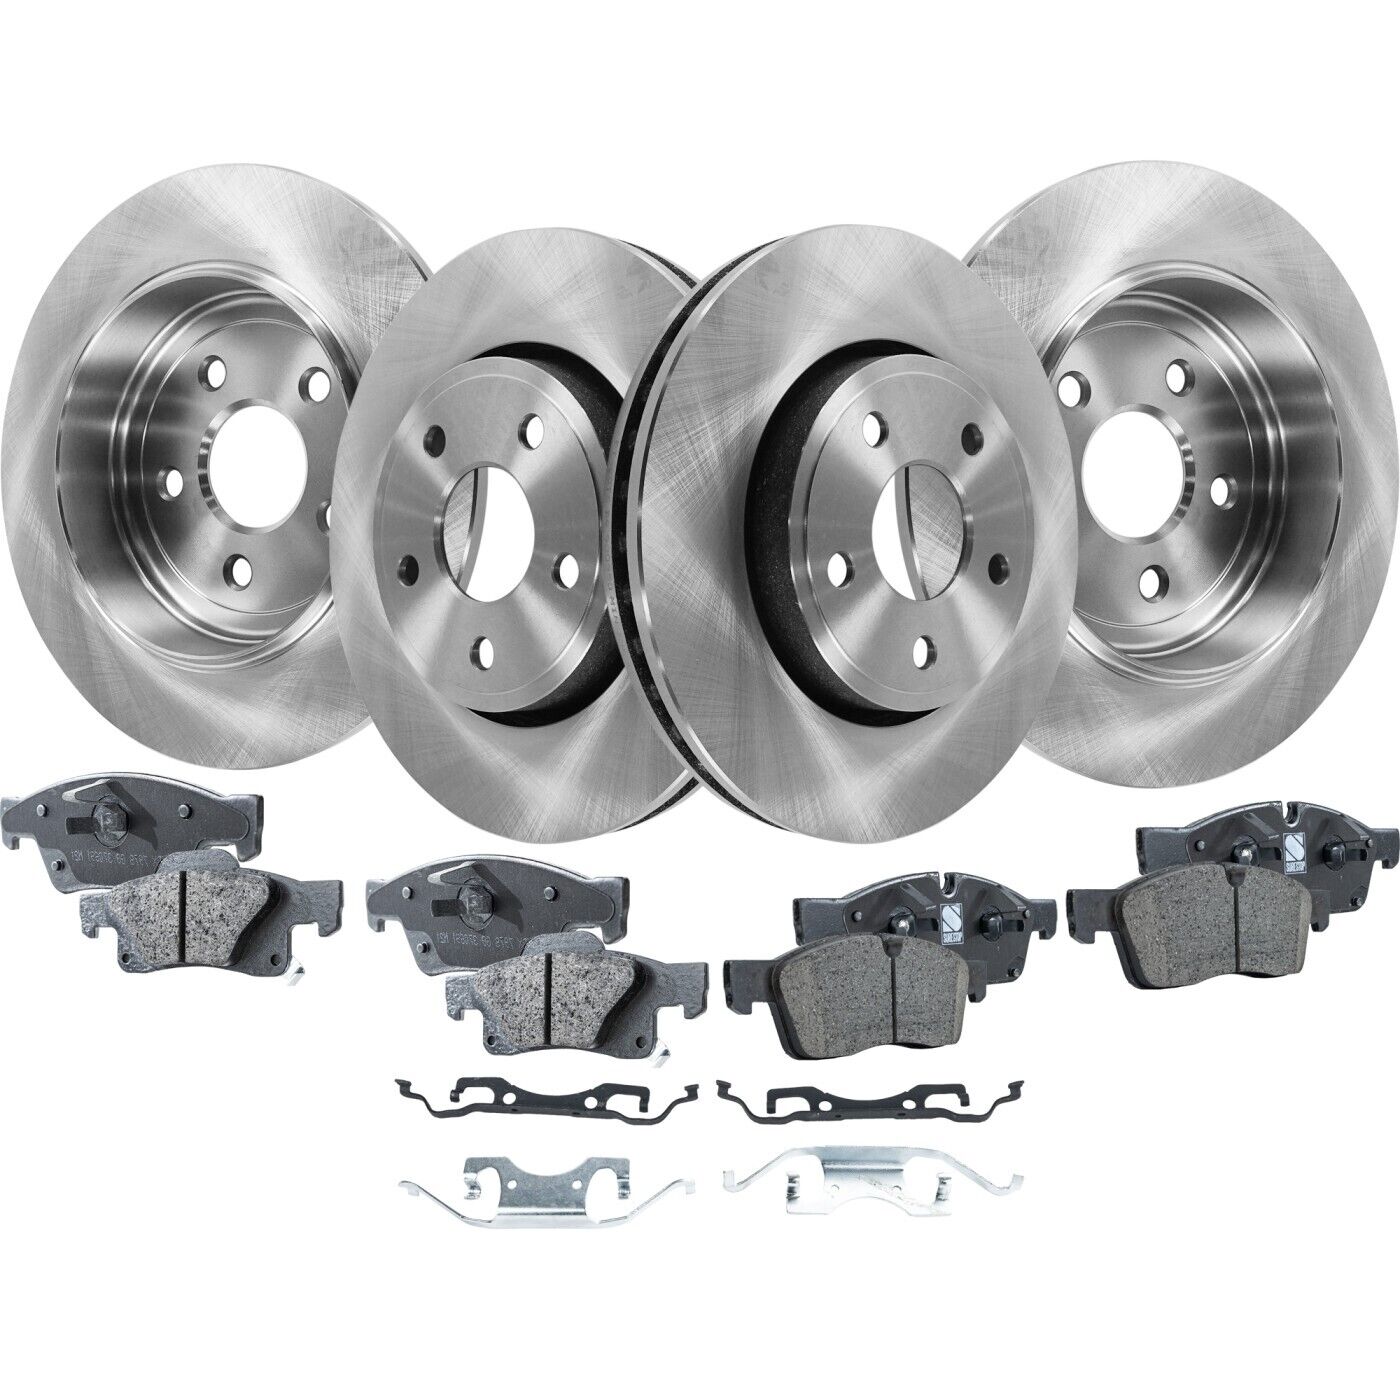 Brake Disc and Pad Kit For 2011-2016 Dodge Durango Truck Front and Rear